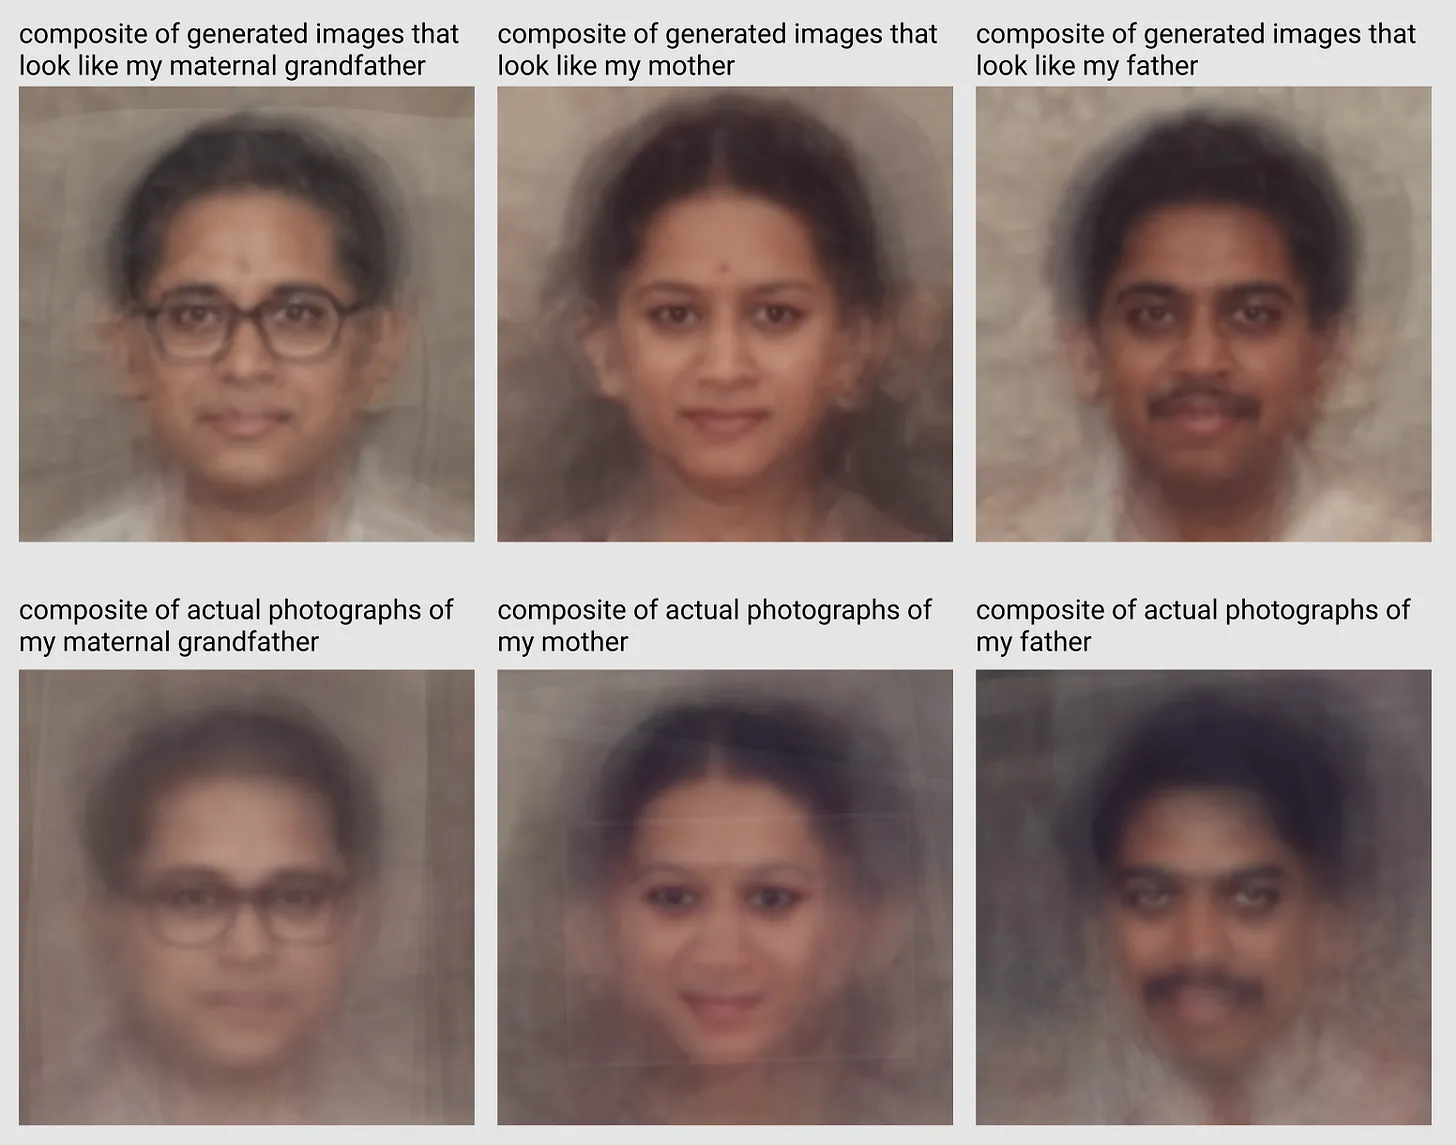 a comparison of composites made up of generated images that look like my grandfather, mother, and father vs. composites made up of actual photographs of my grandfather, mother and father.